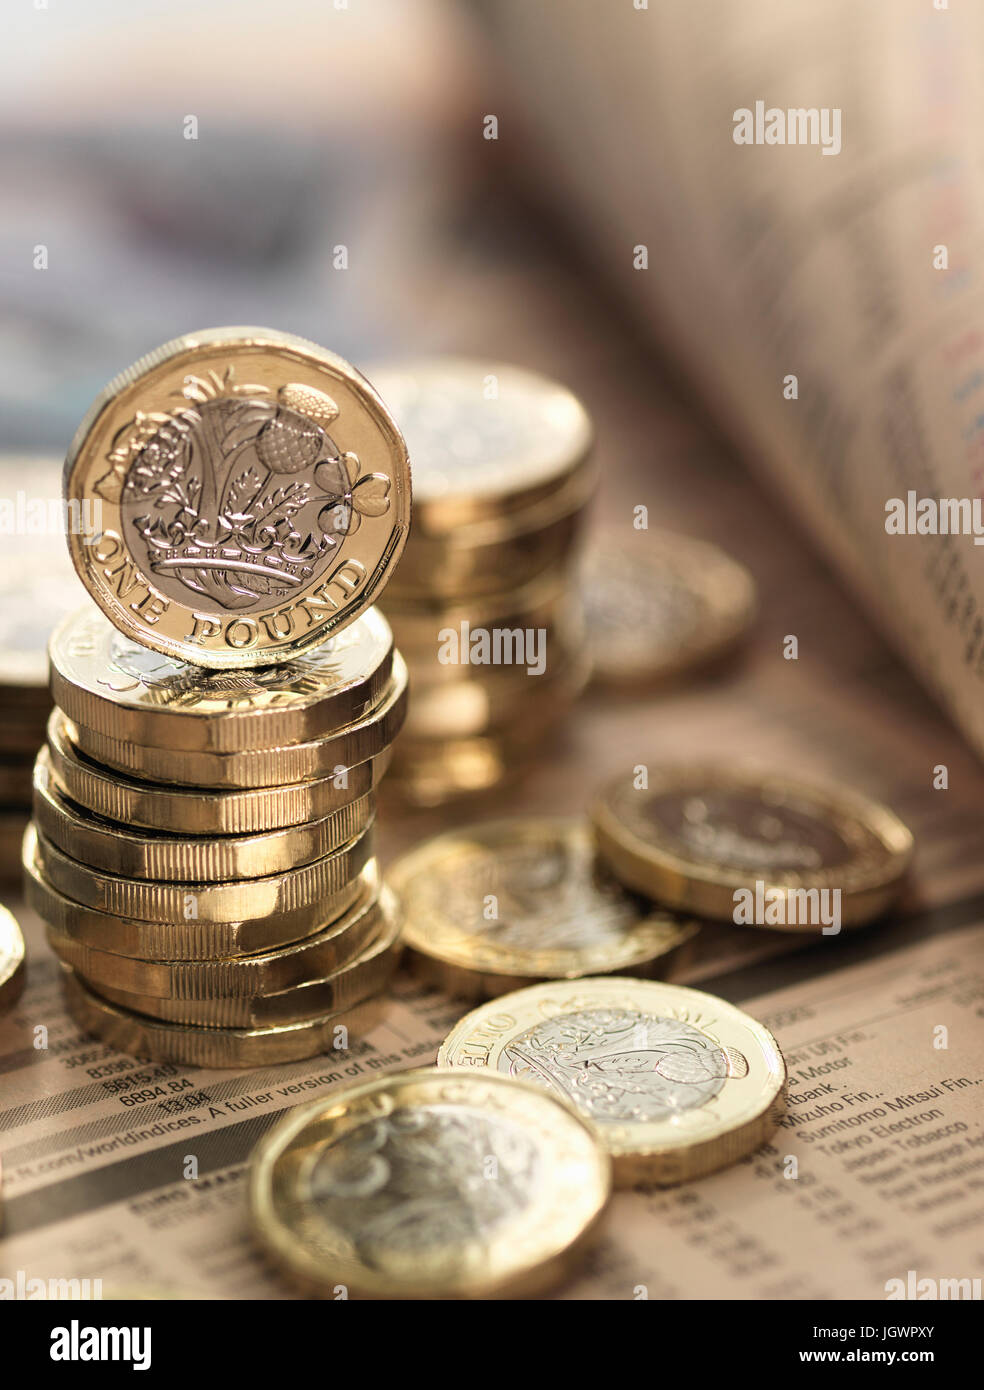 Still life of British currency on financial newspaper, close-up Stock Photo